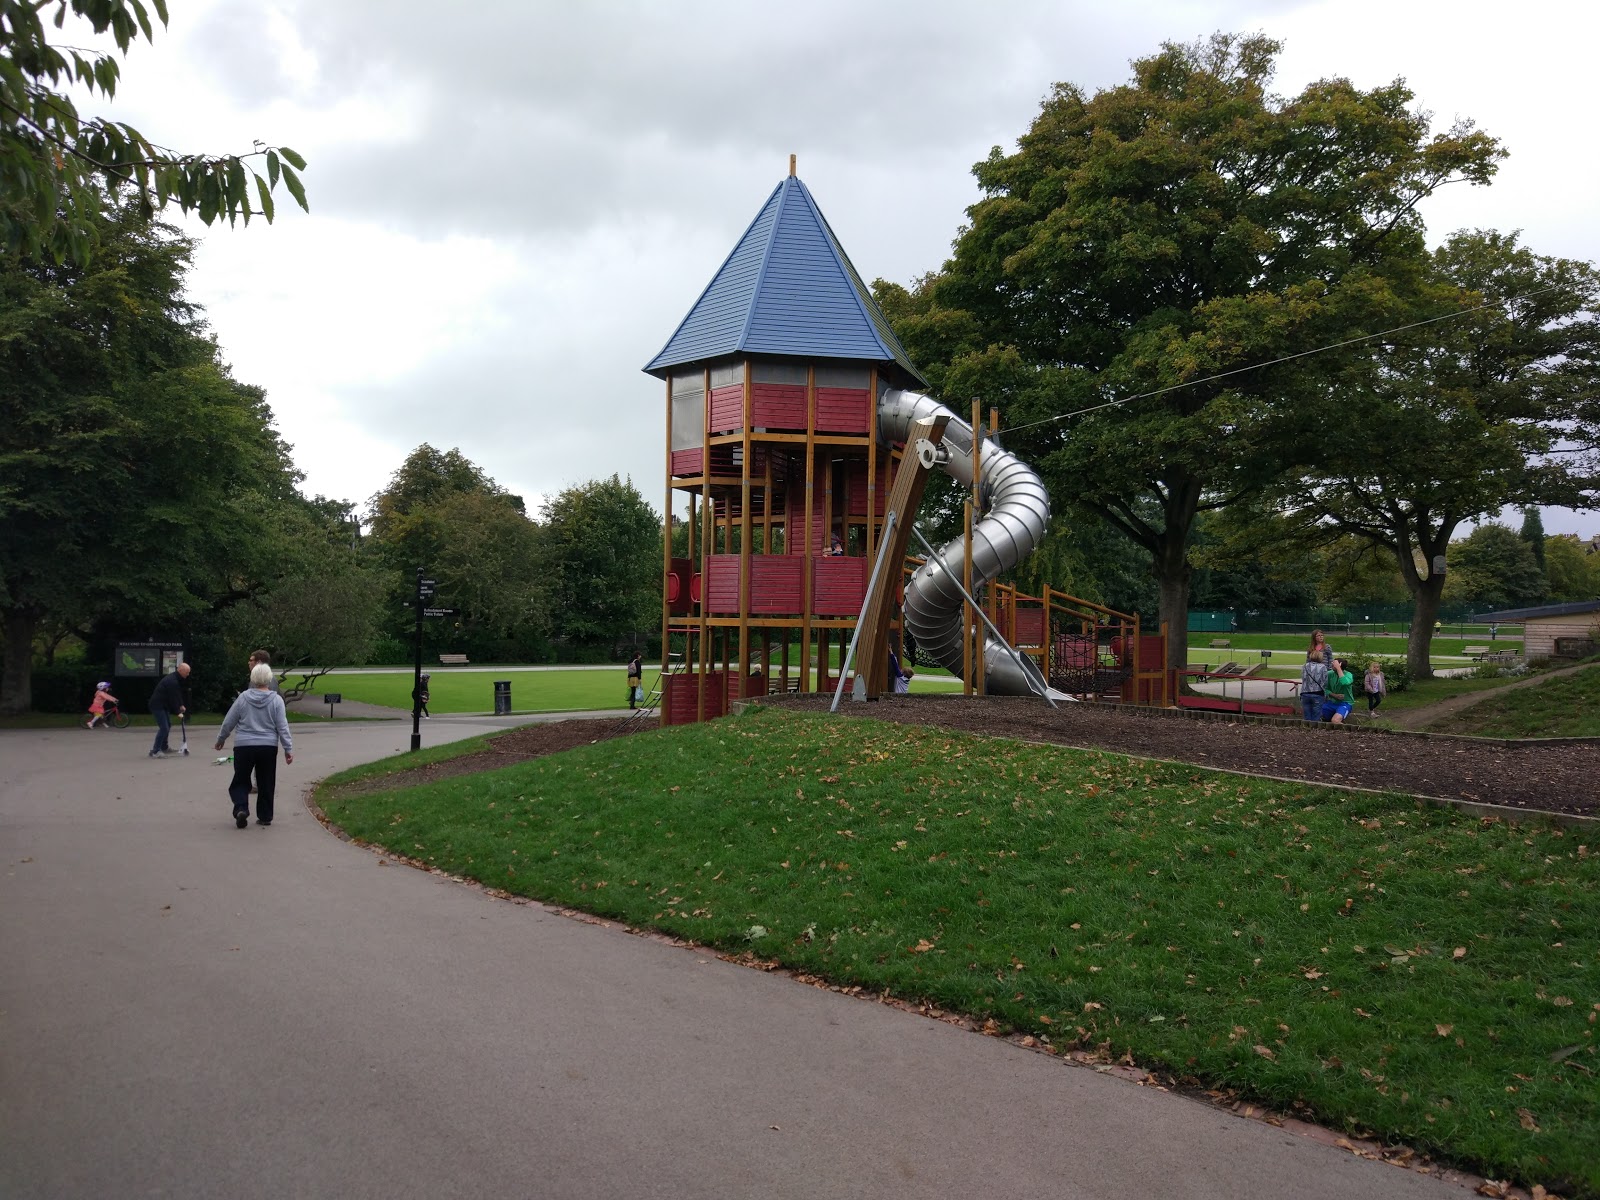 https://whatremovals.co.uk/wp-content/uploads/2022/02/Greenhead Park-300x225.jpeg